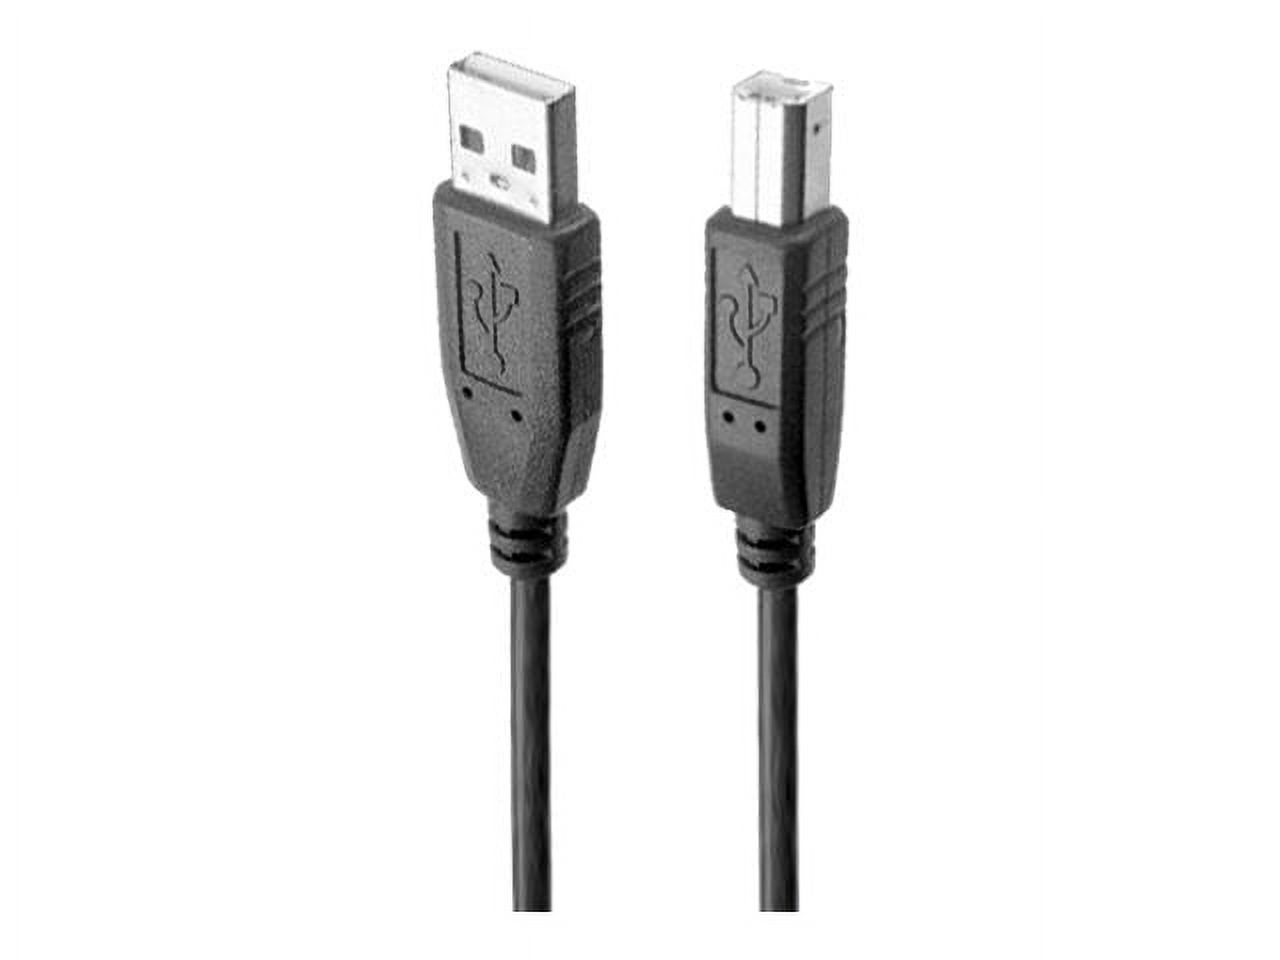 link depot usb a to b printer cable 6' 10' 15' - image 1 of 3